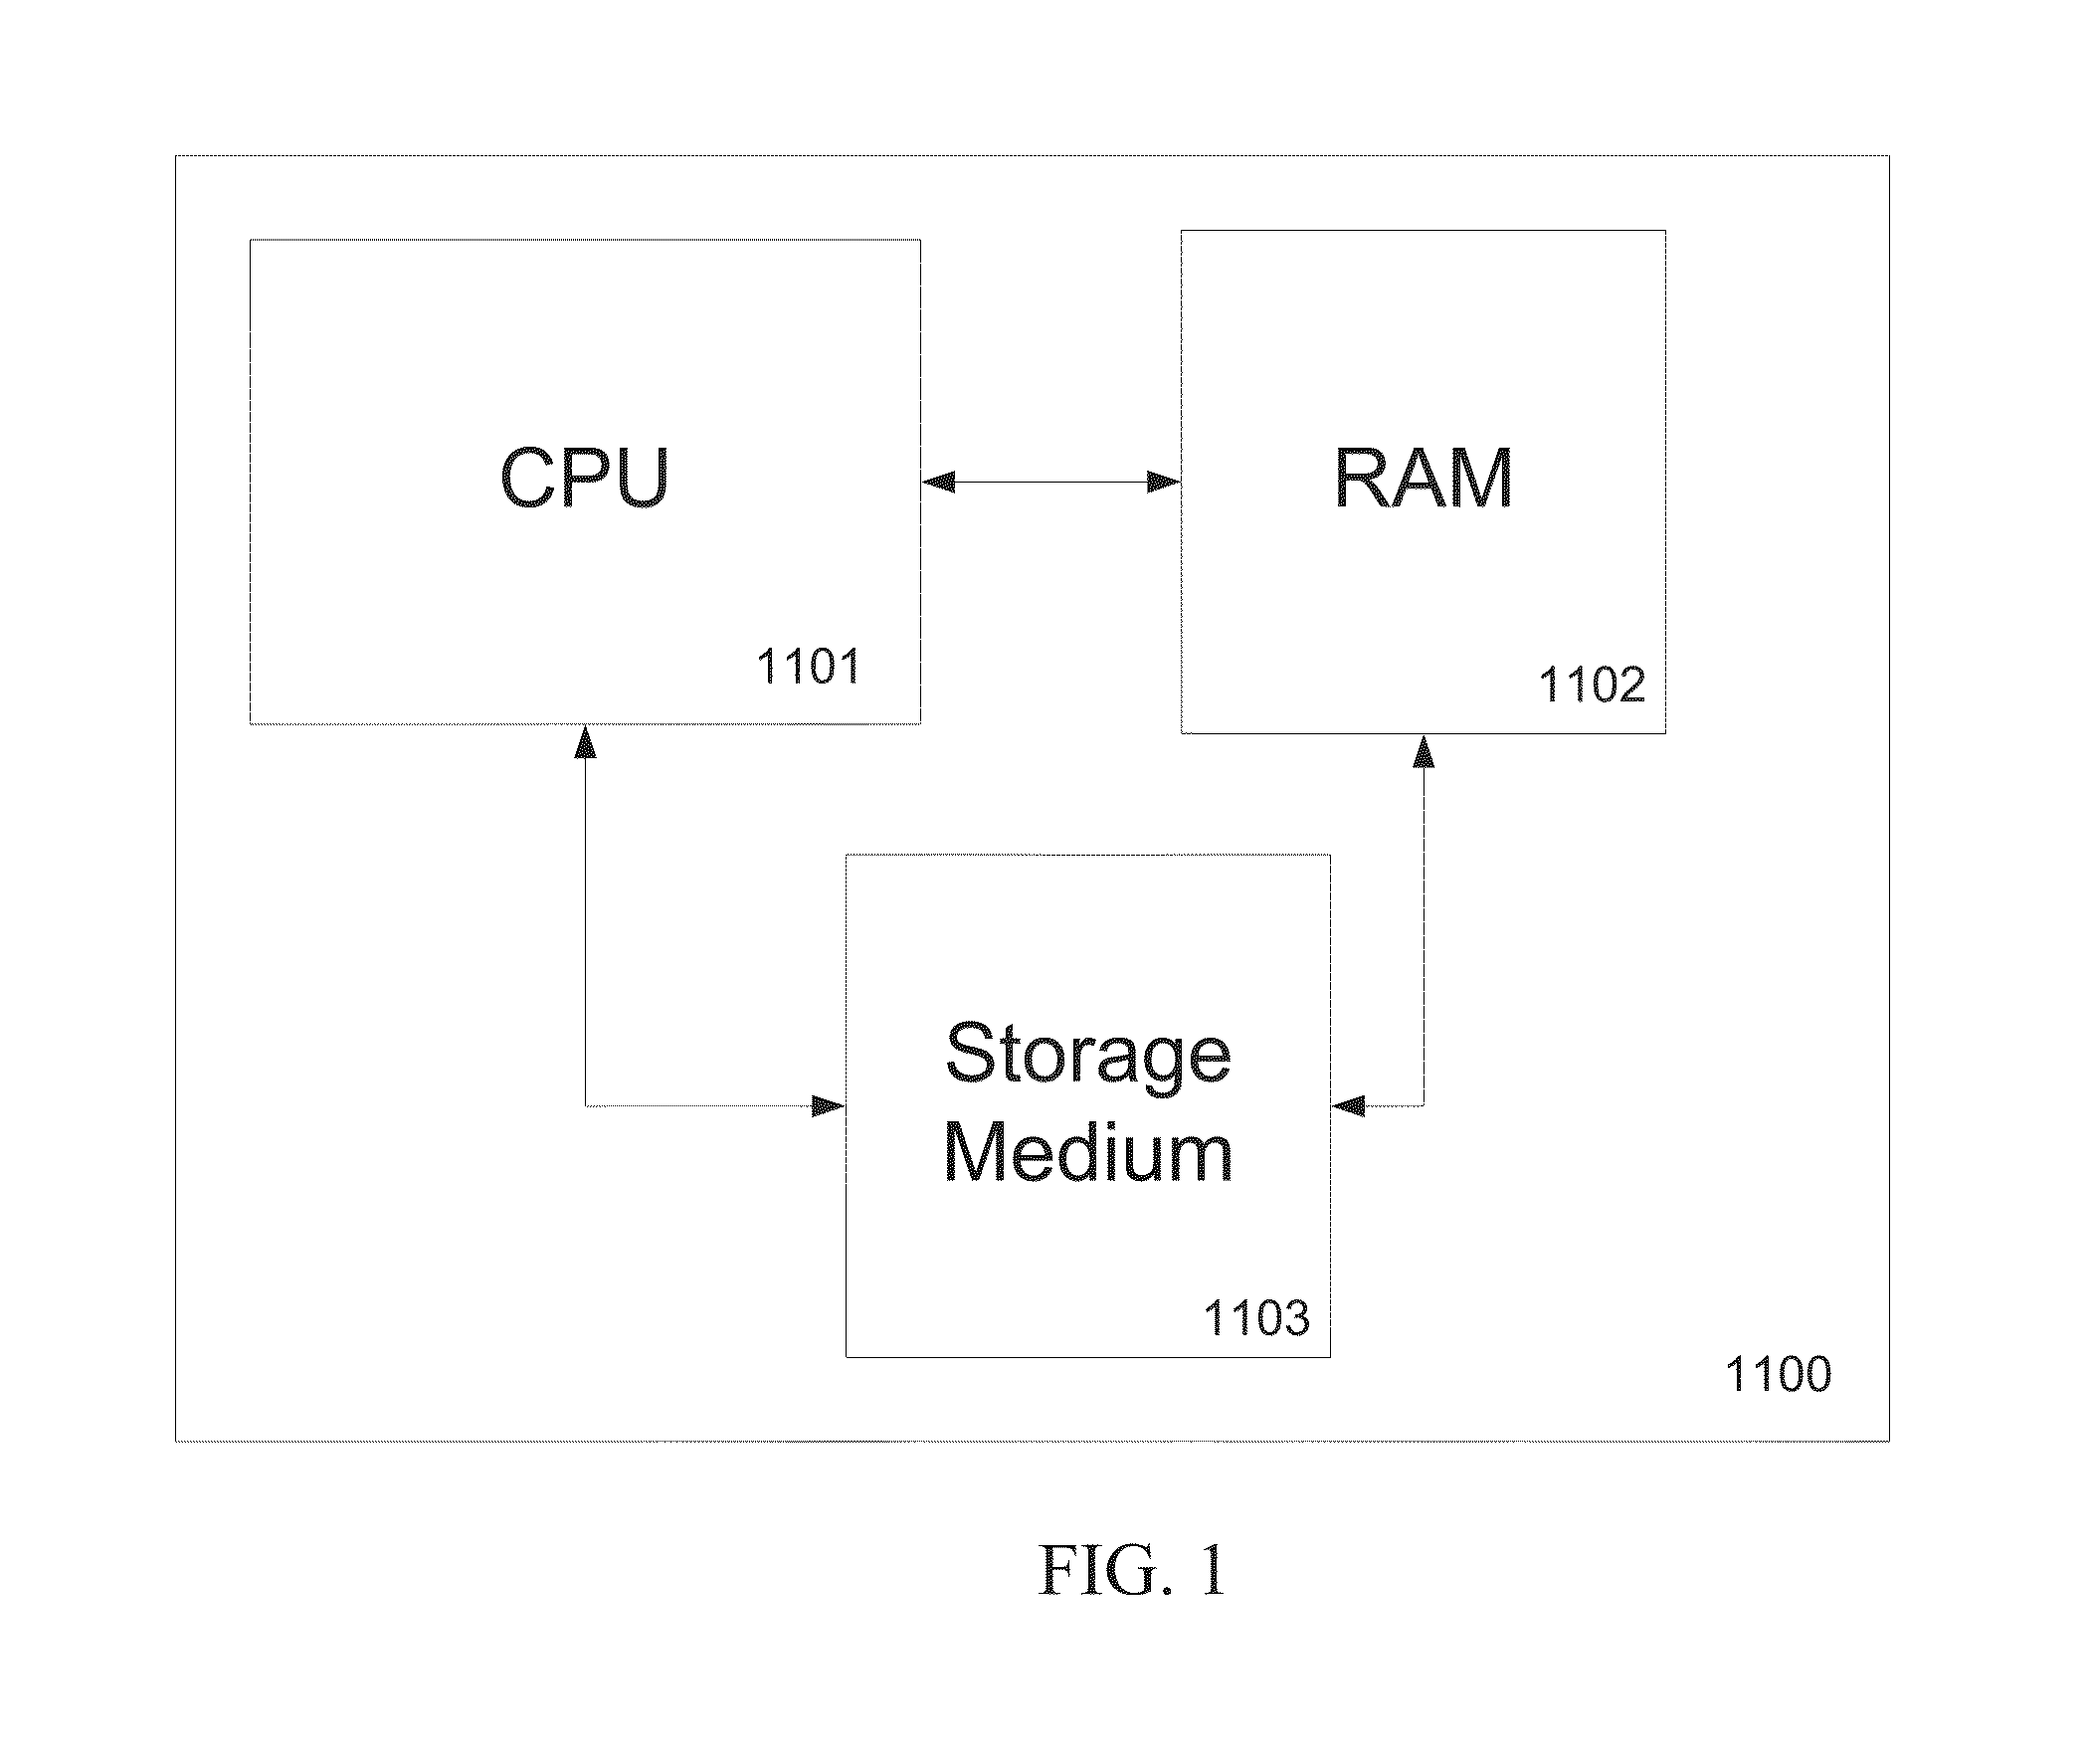 System and method for analyzing and reporting heatlh plan management performance